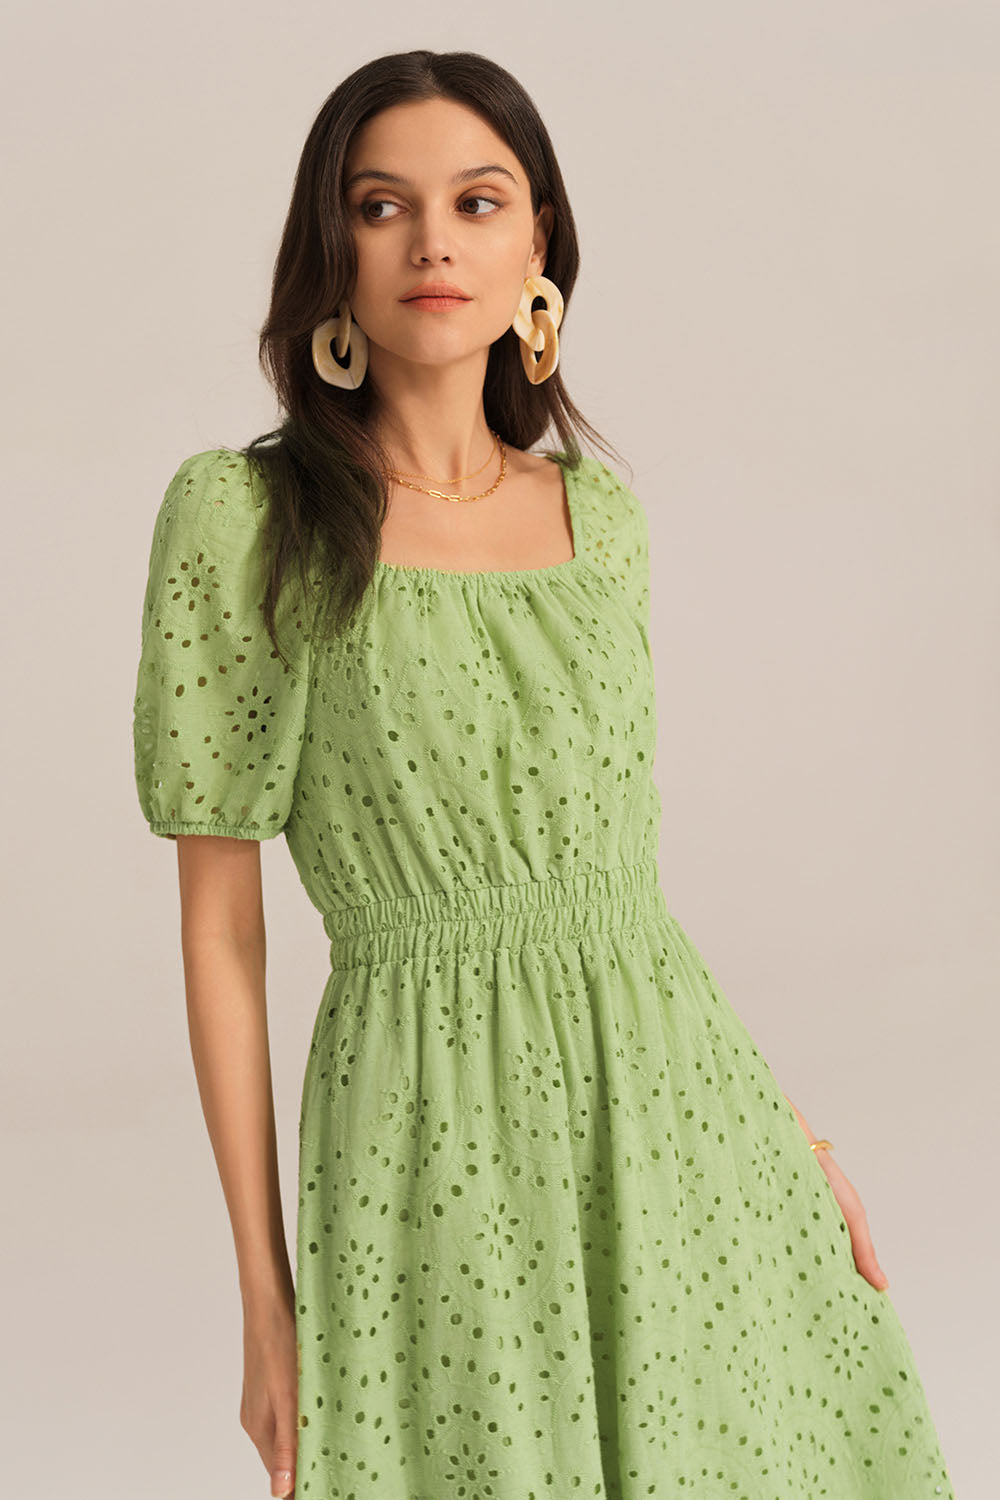 Hollowed-out Cotton Short Sleeve Square Neck Dress - Green